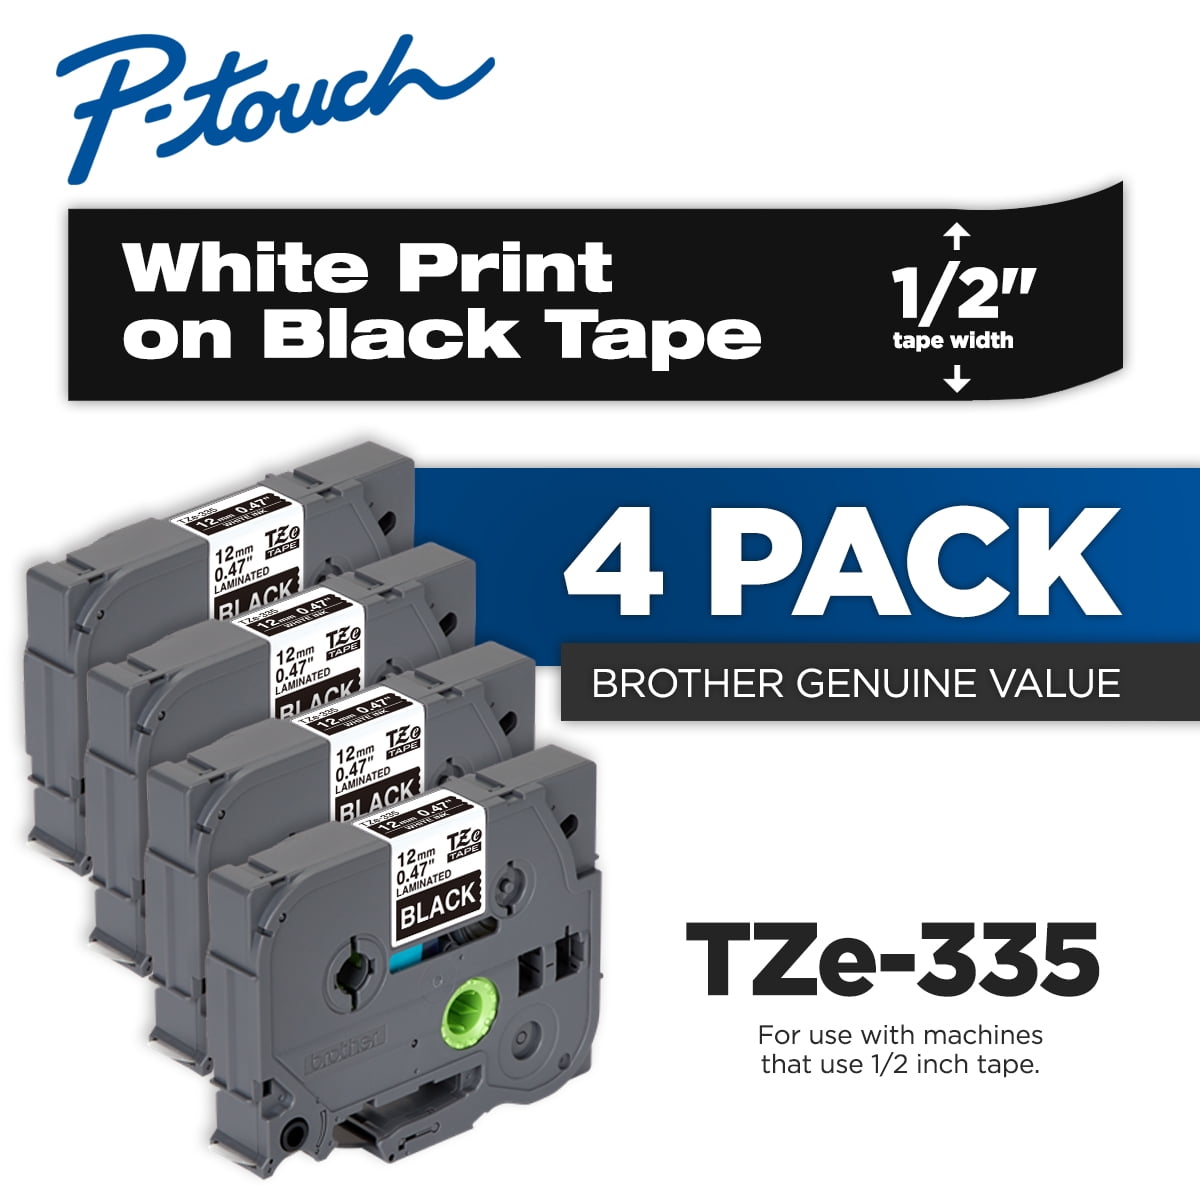 10PK TZ 335 TZe 335 White on Black Label Tape 1/2'' For Brother P-Touch PT300 